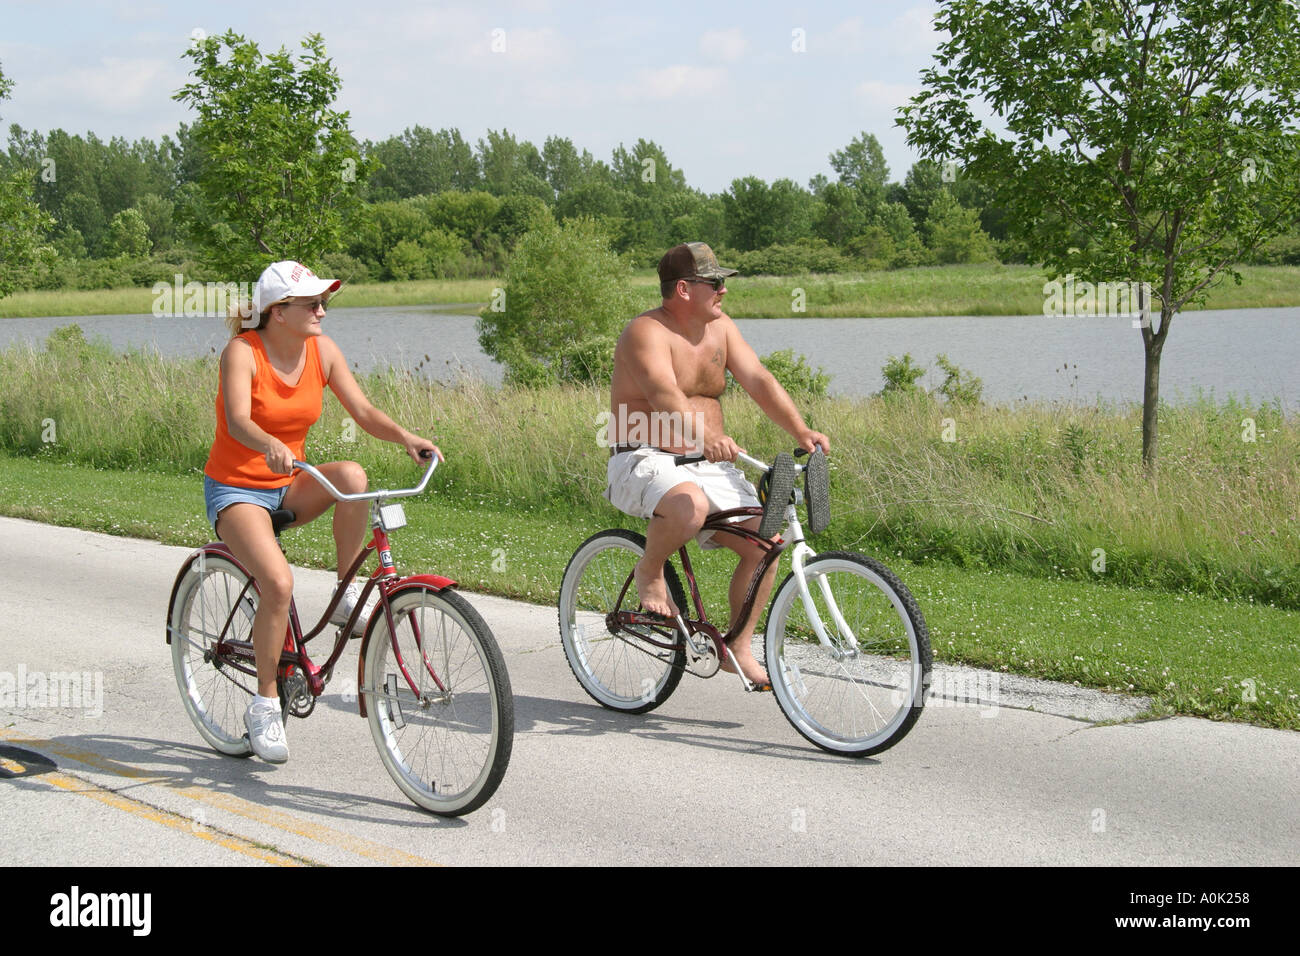 Ohio Maumee Bay Water State Park, terrain public, loisirs, bicyclette vélo vélo vélo vélo vélo vélo vélo vélo vélo vélo vélo vélo vélo vélo vélo vélo vélo vélo vélo vélo vélo vélo vélo vélo vélo vélo vélo vélo vélo vélo vélo vélo vélo cyclistes exercice Banque D'Images